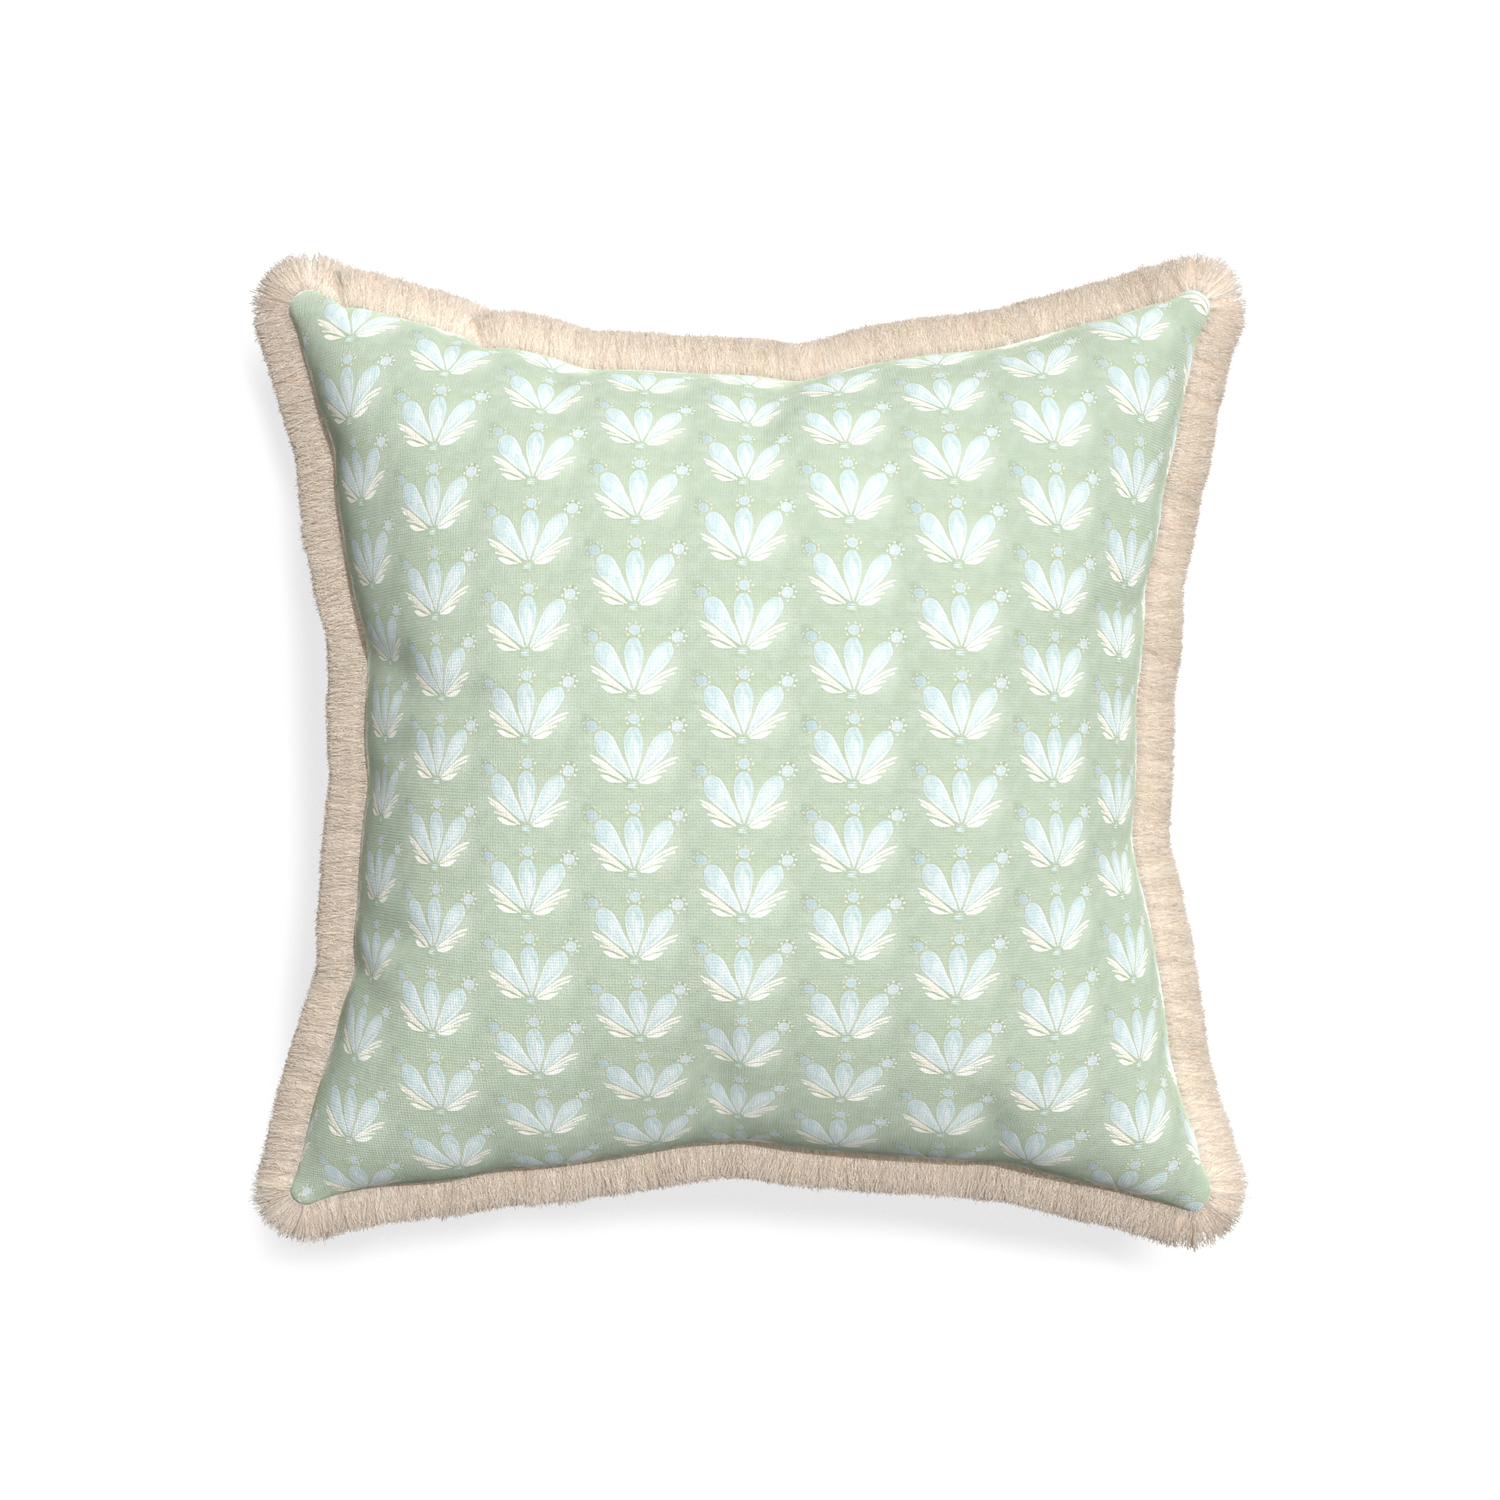 20-square serena sea salt custom blue & green floral drop repeatpillow with cream fringe on white background